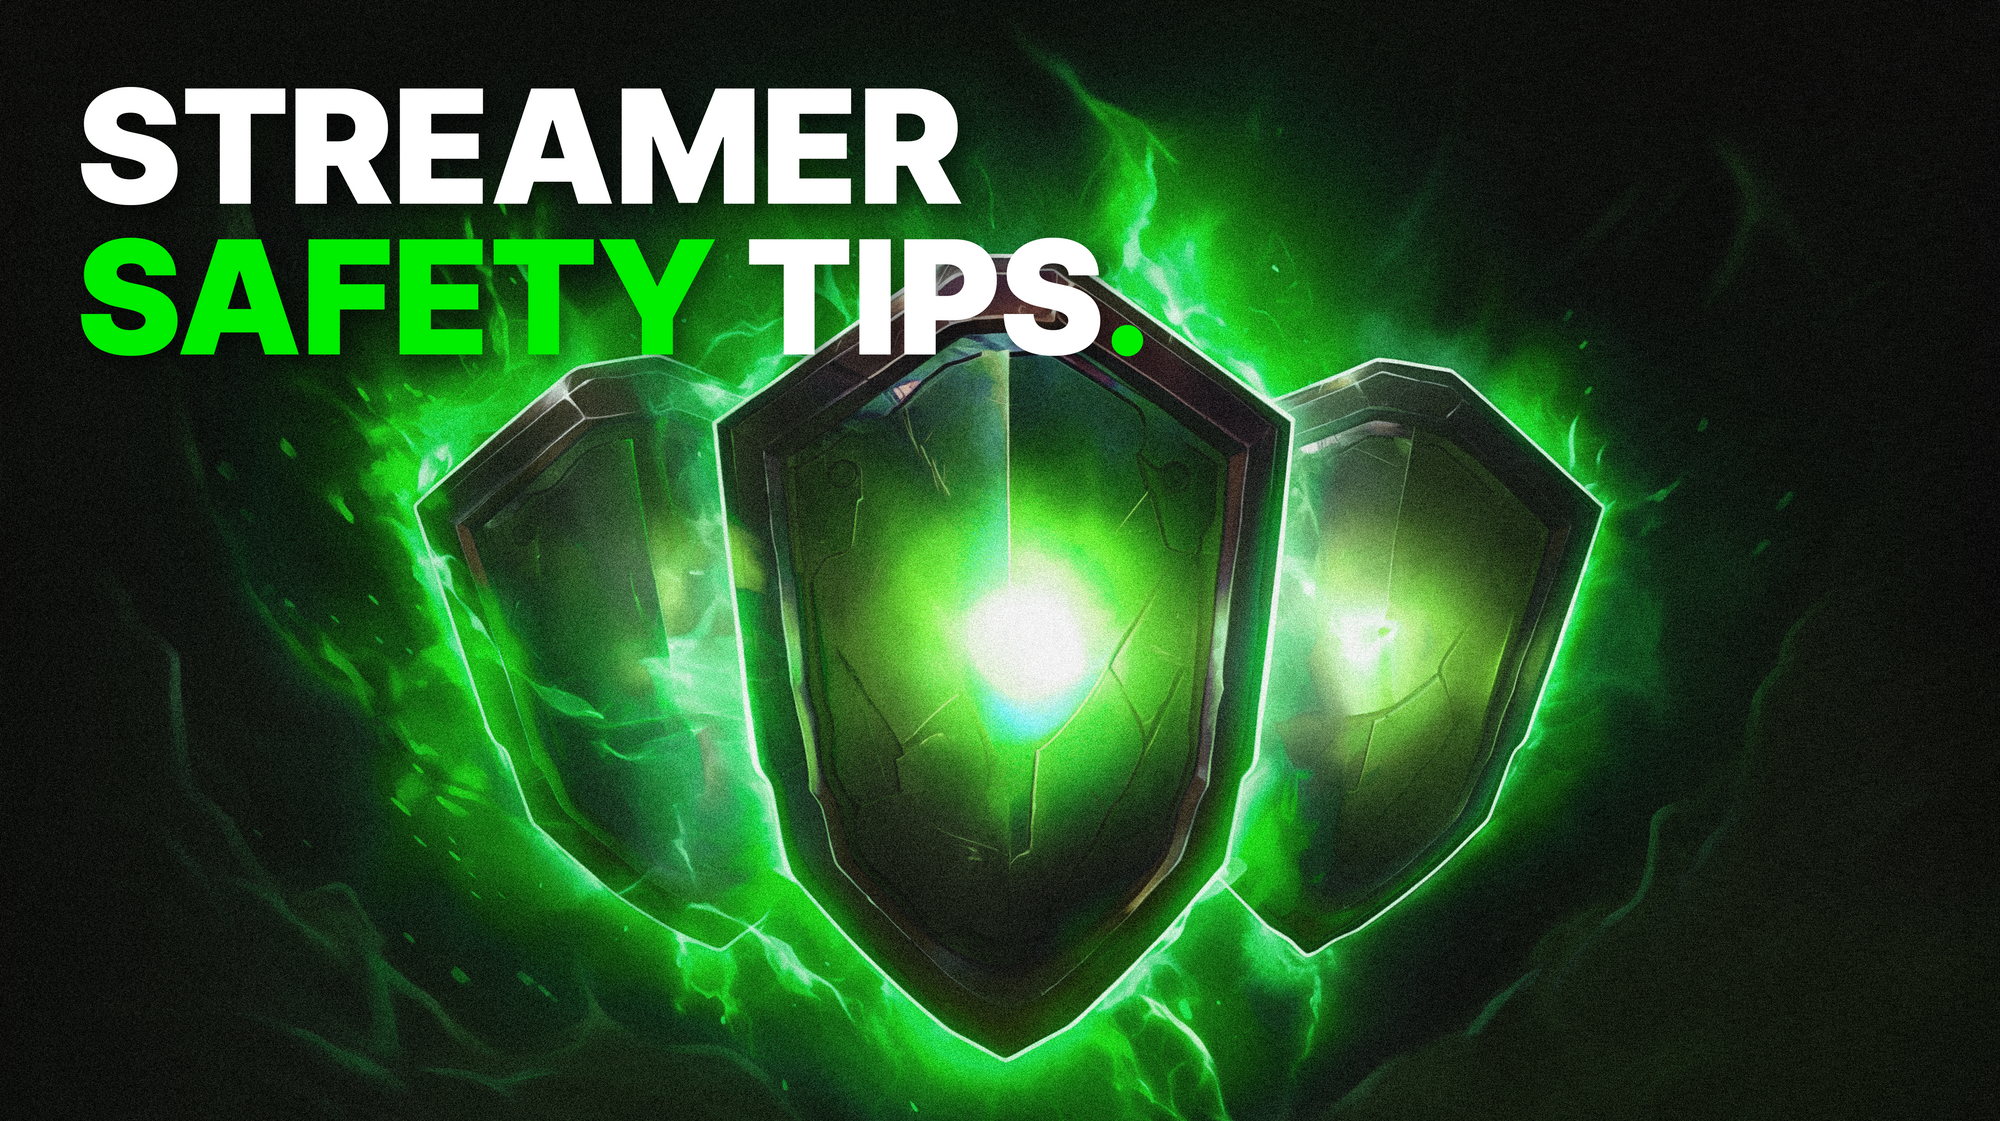 Streamer Safety Tips: How to Stream Safely on Kick